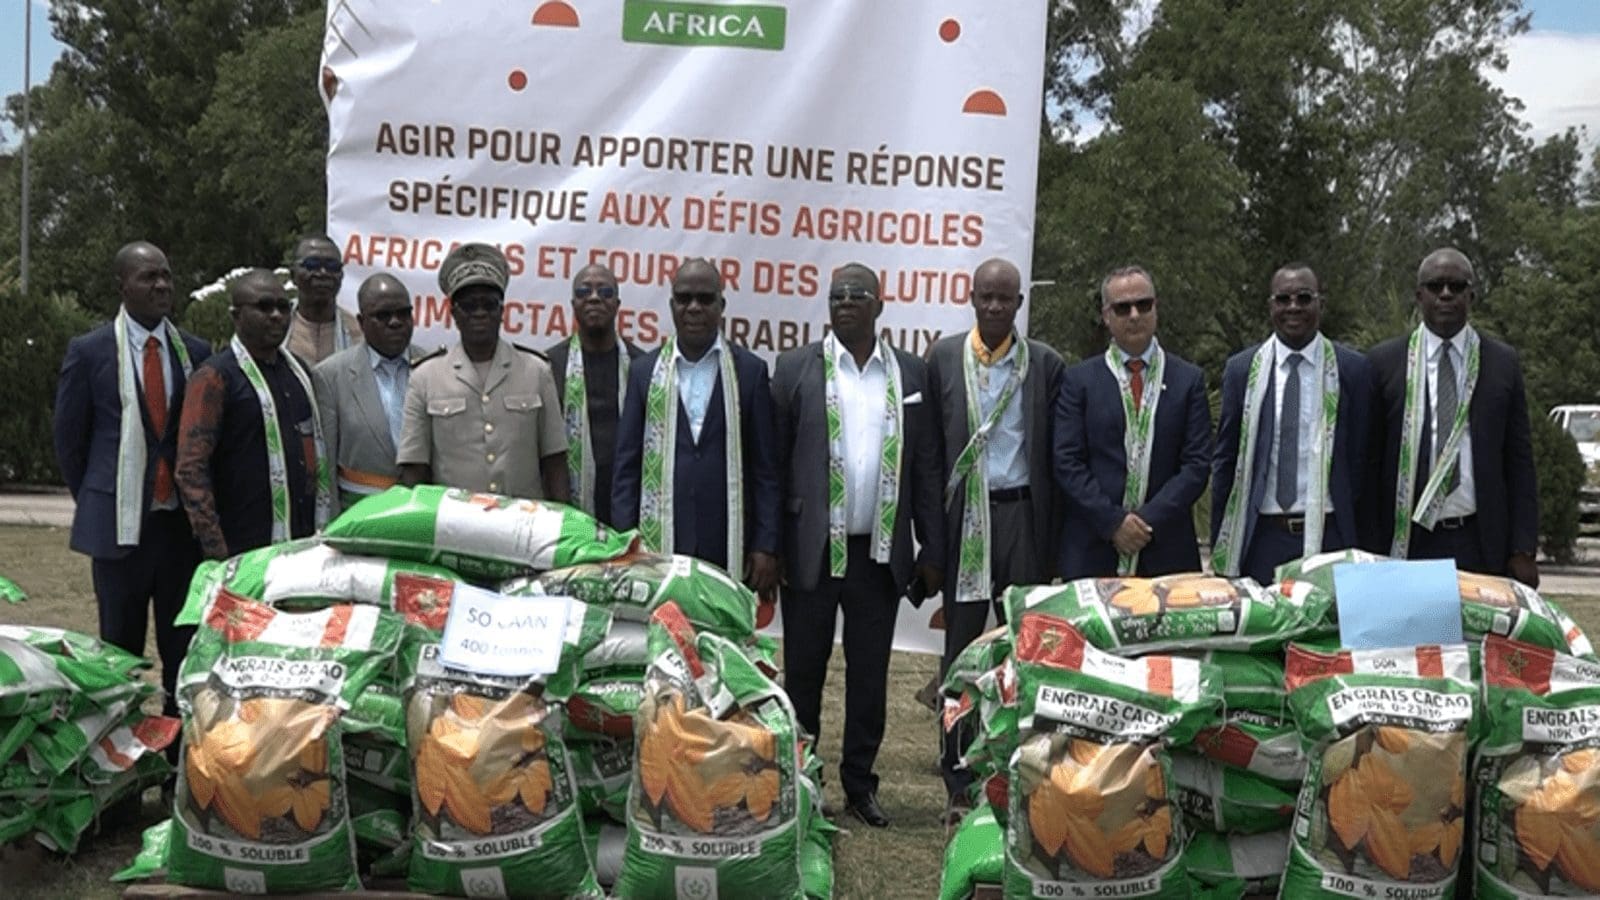 OCP Africa under its Fertilizer Relief Program provides 10,000 tons of fertilizers to Ivory Coast